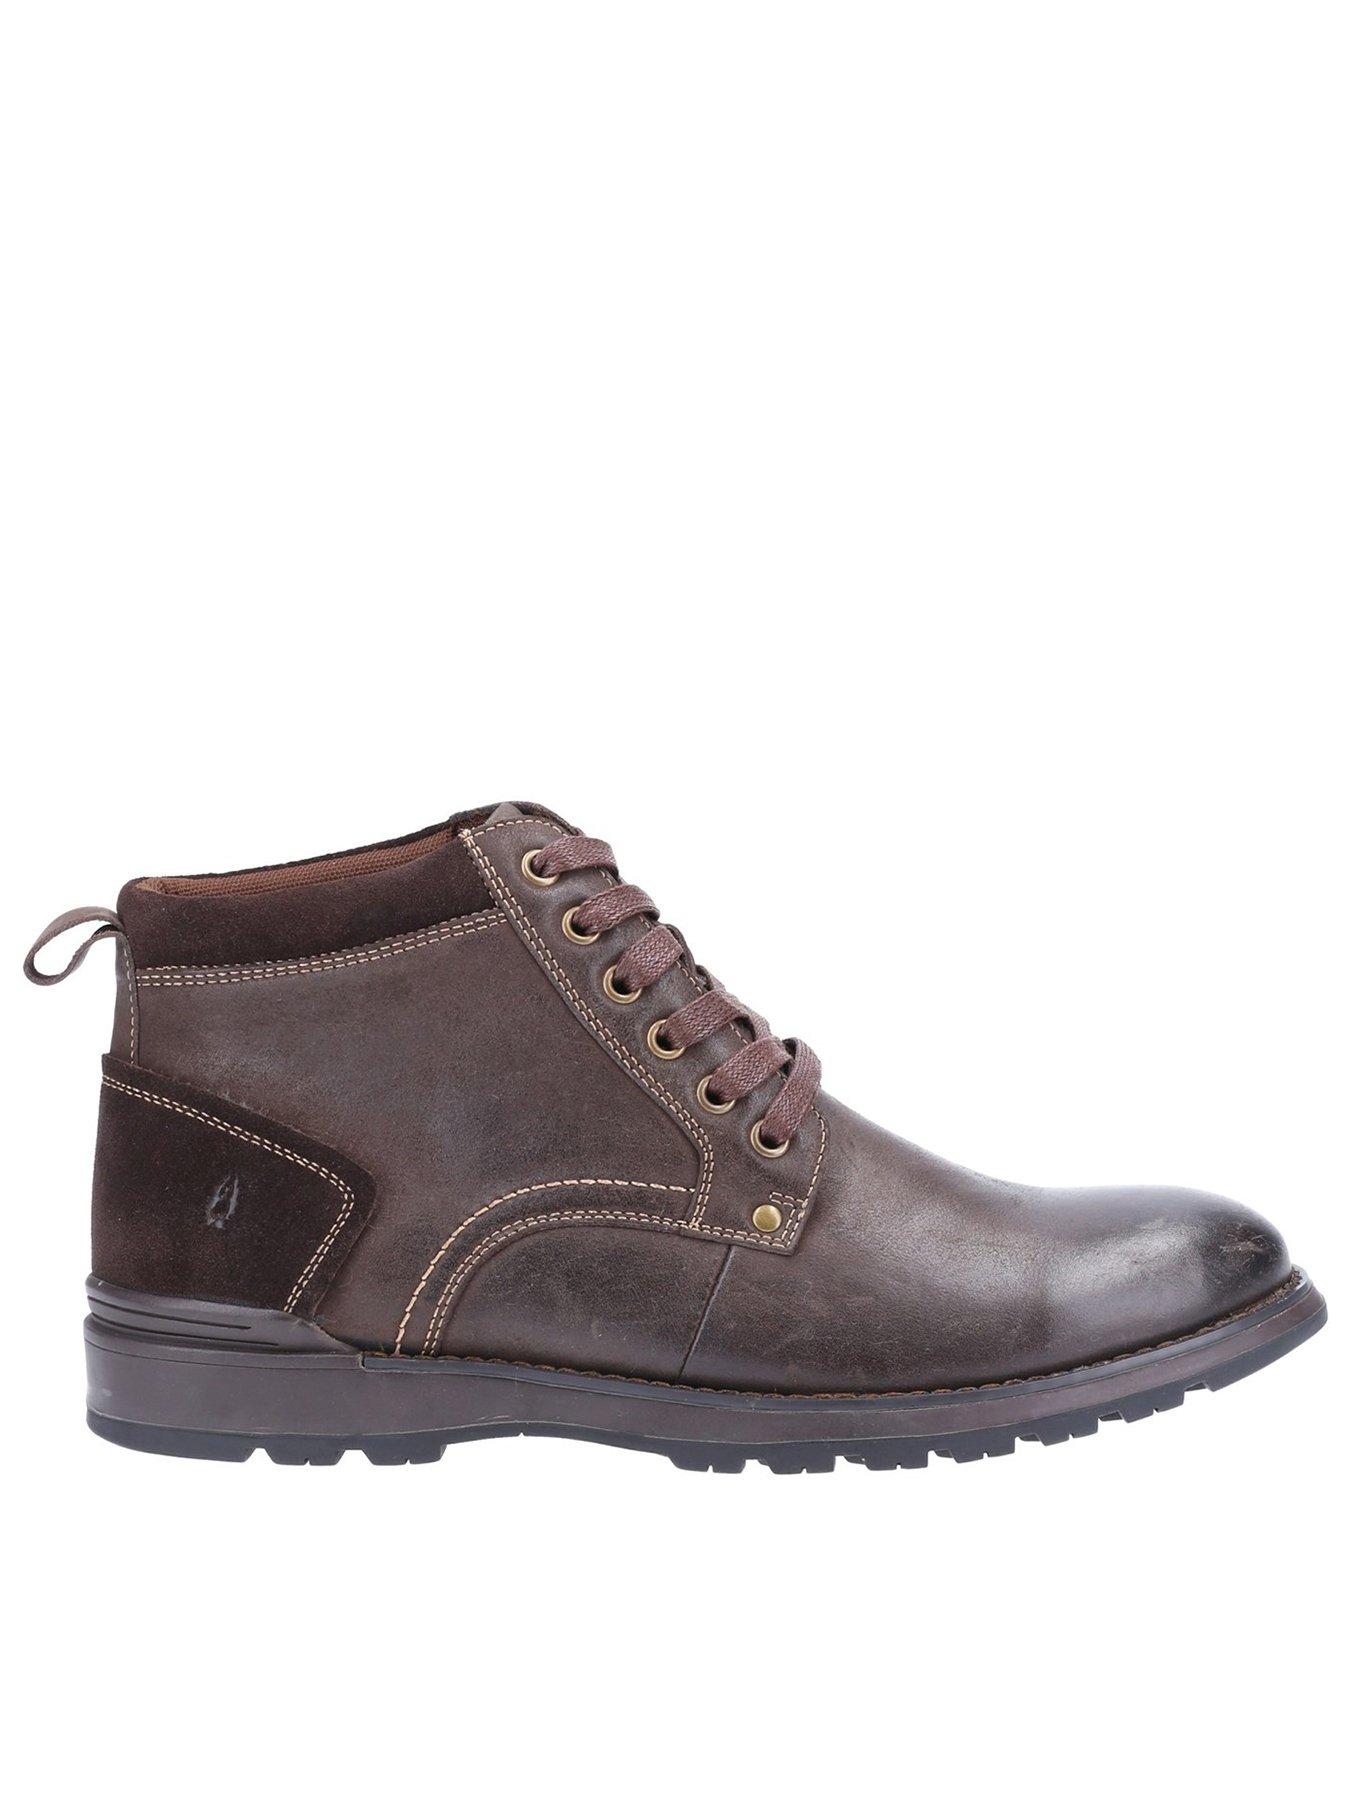 Hush Puppies Dean Leather Lace Up Boots - Brown | very.co.uk